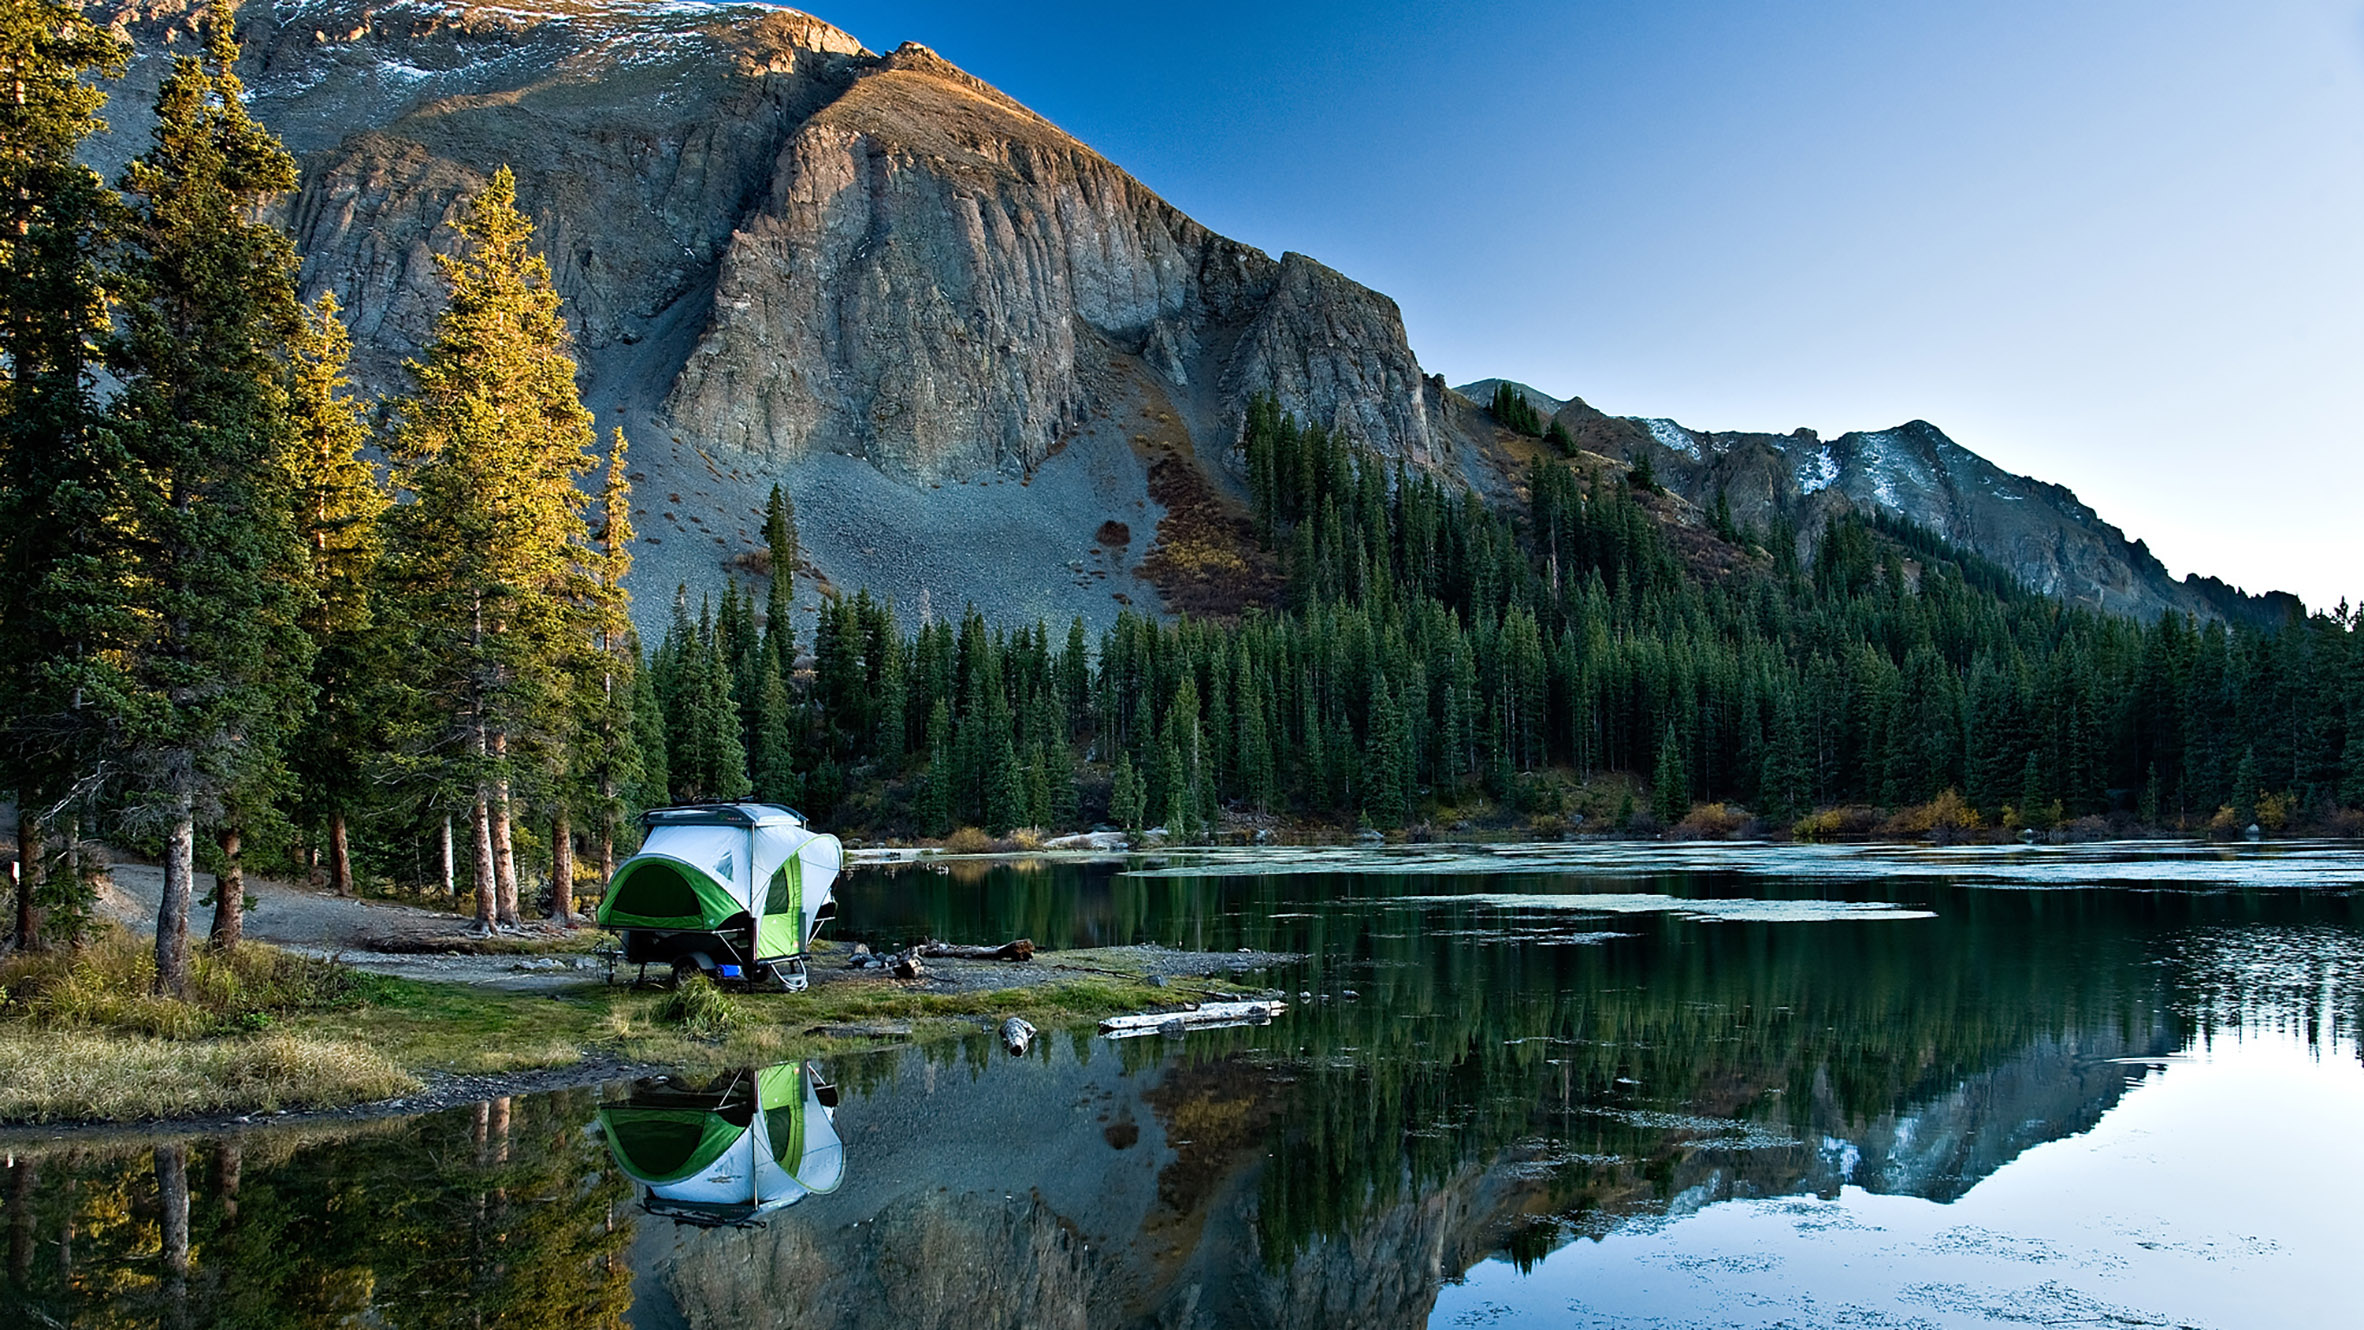 SylvanSport Go camping trailer parked by an isolated lake surrounded by mountains